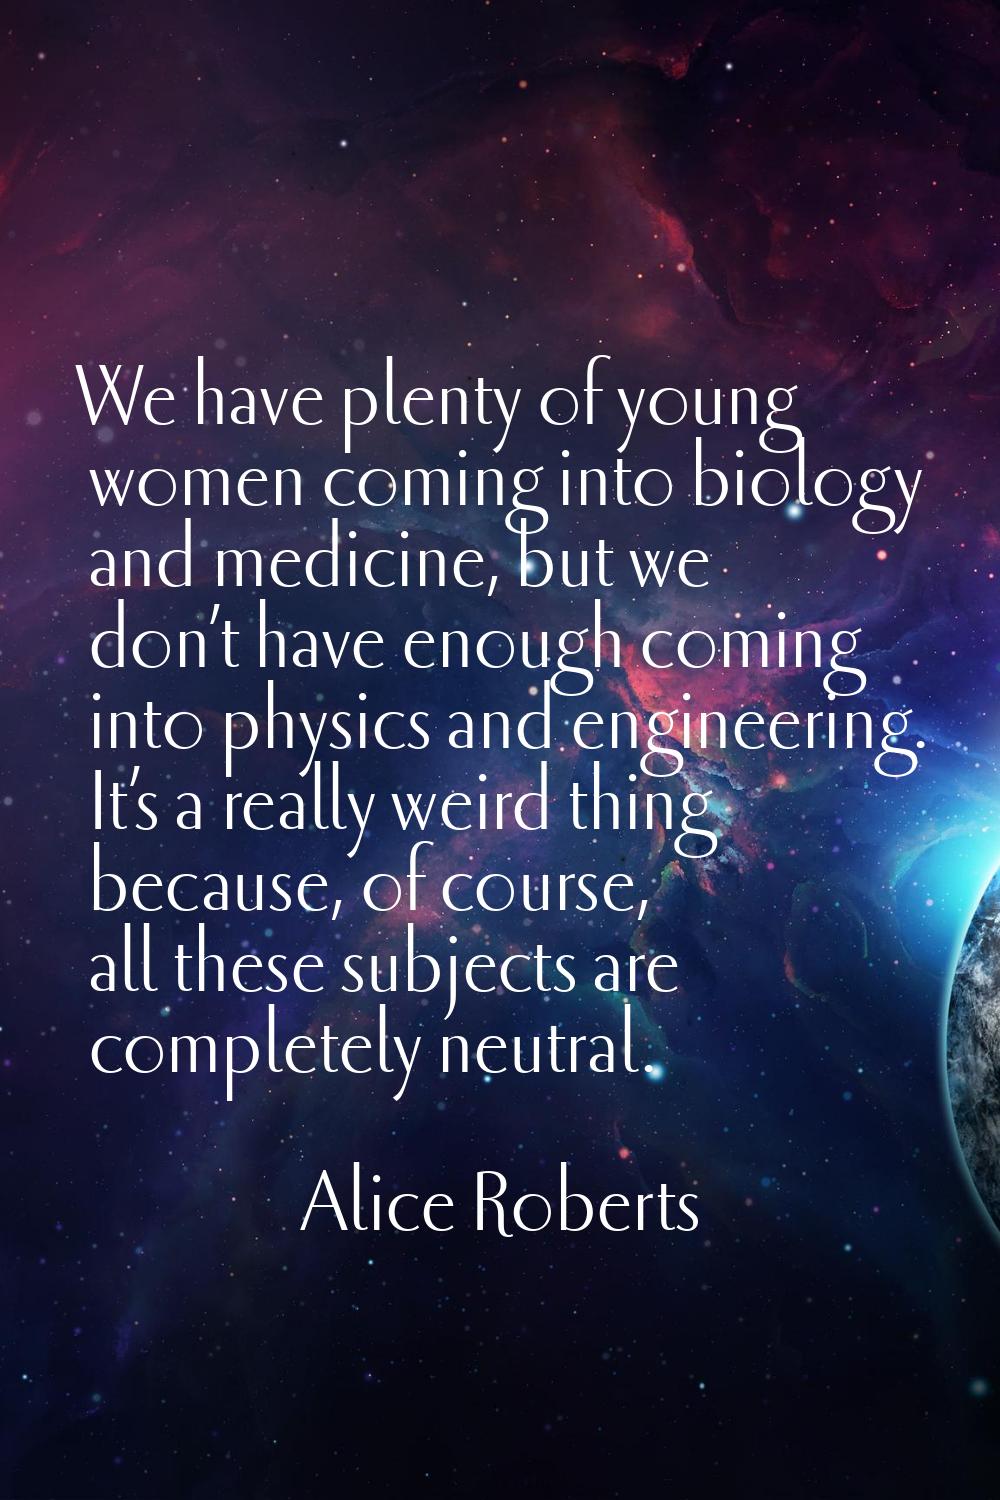 We have plenty of young women coming into biology and medicine, but we don’t have enough coming int